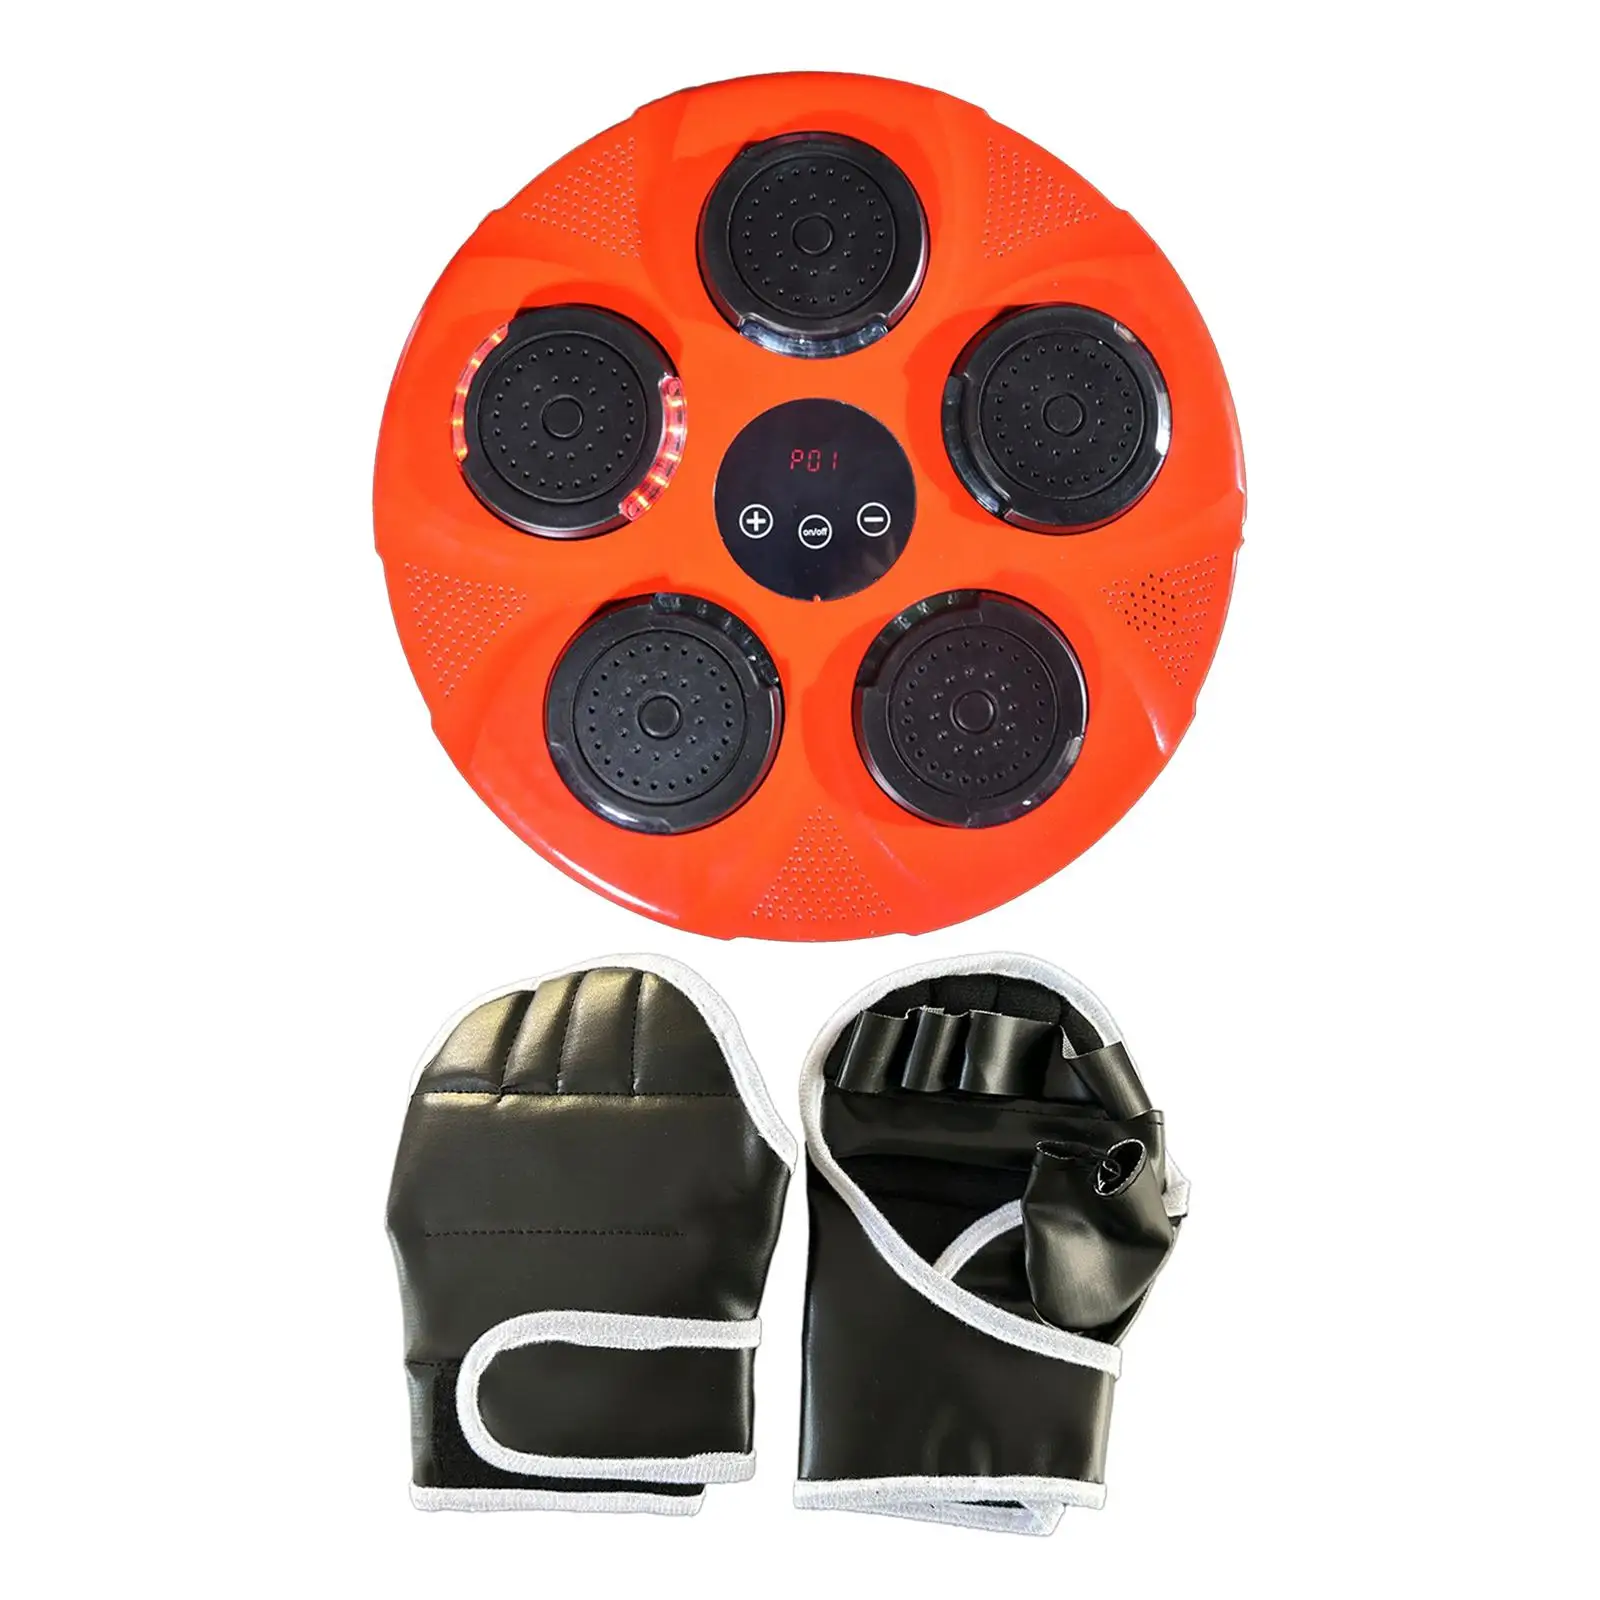 Music Boxing Machine Electronic Music Boxing Wall Target RGB Light Sandbag Musical Boxing Plate for Exercise Improves Perception